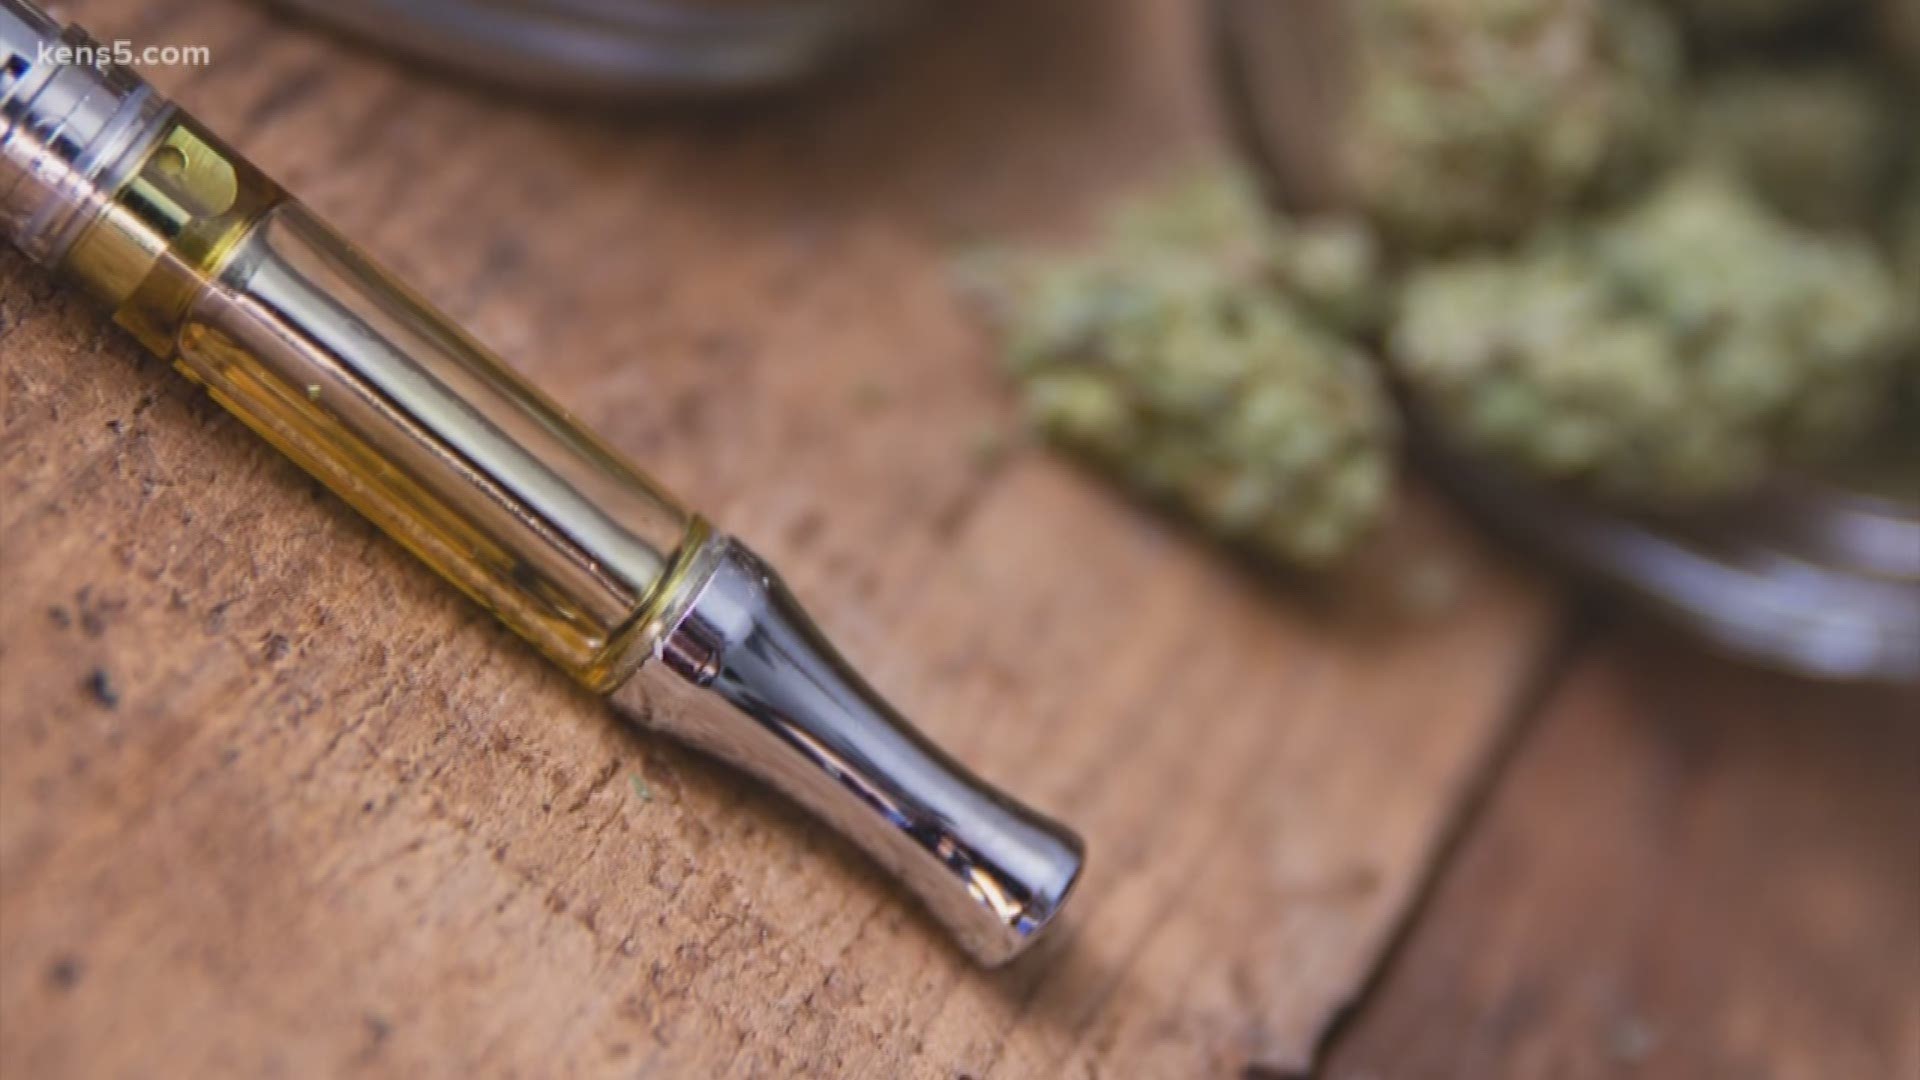 There's talk of easing the severe penalties for a student caughtwith THC oil in a vaping device. It's a mandatory expulsion from school with a possible felony.